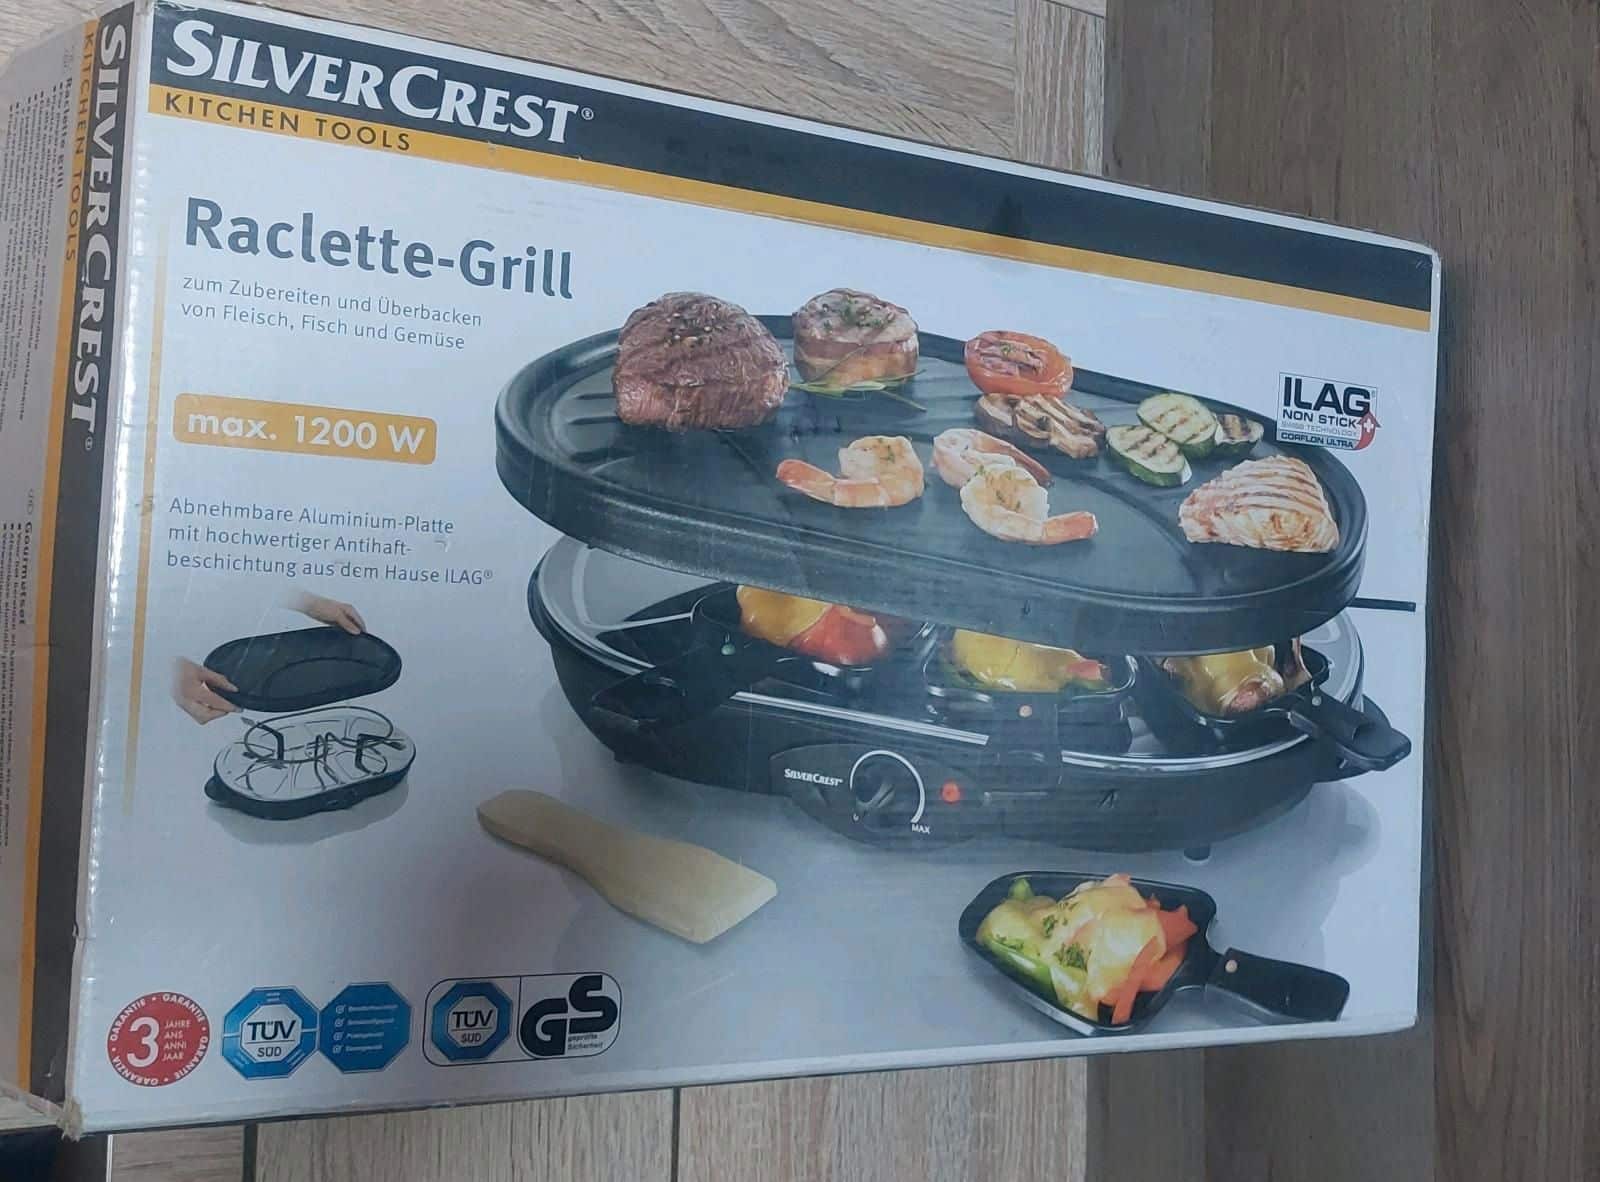 SILVERCREST KITCHEN TOOLS Raclette-Grill